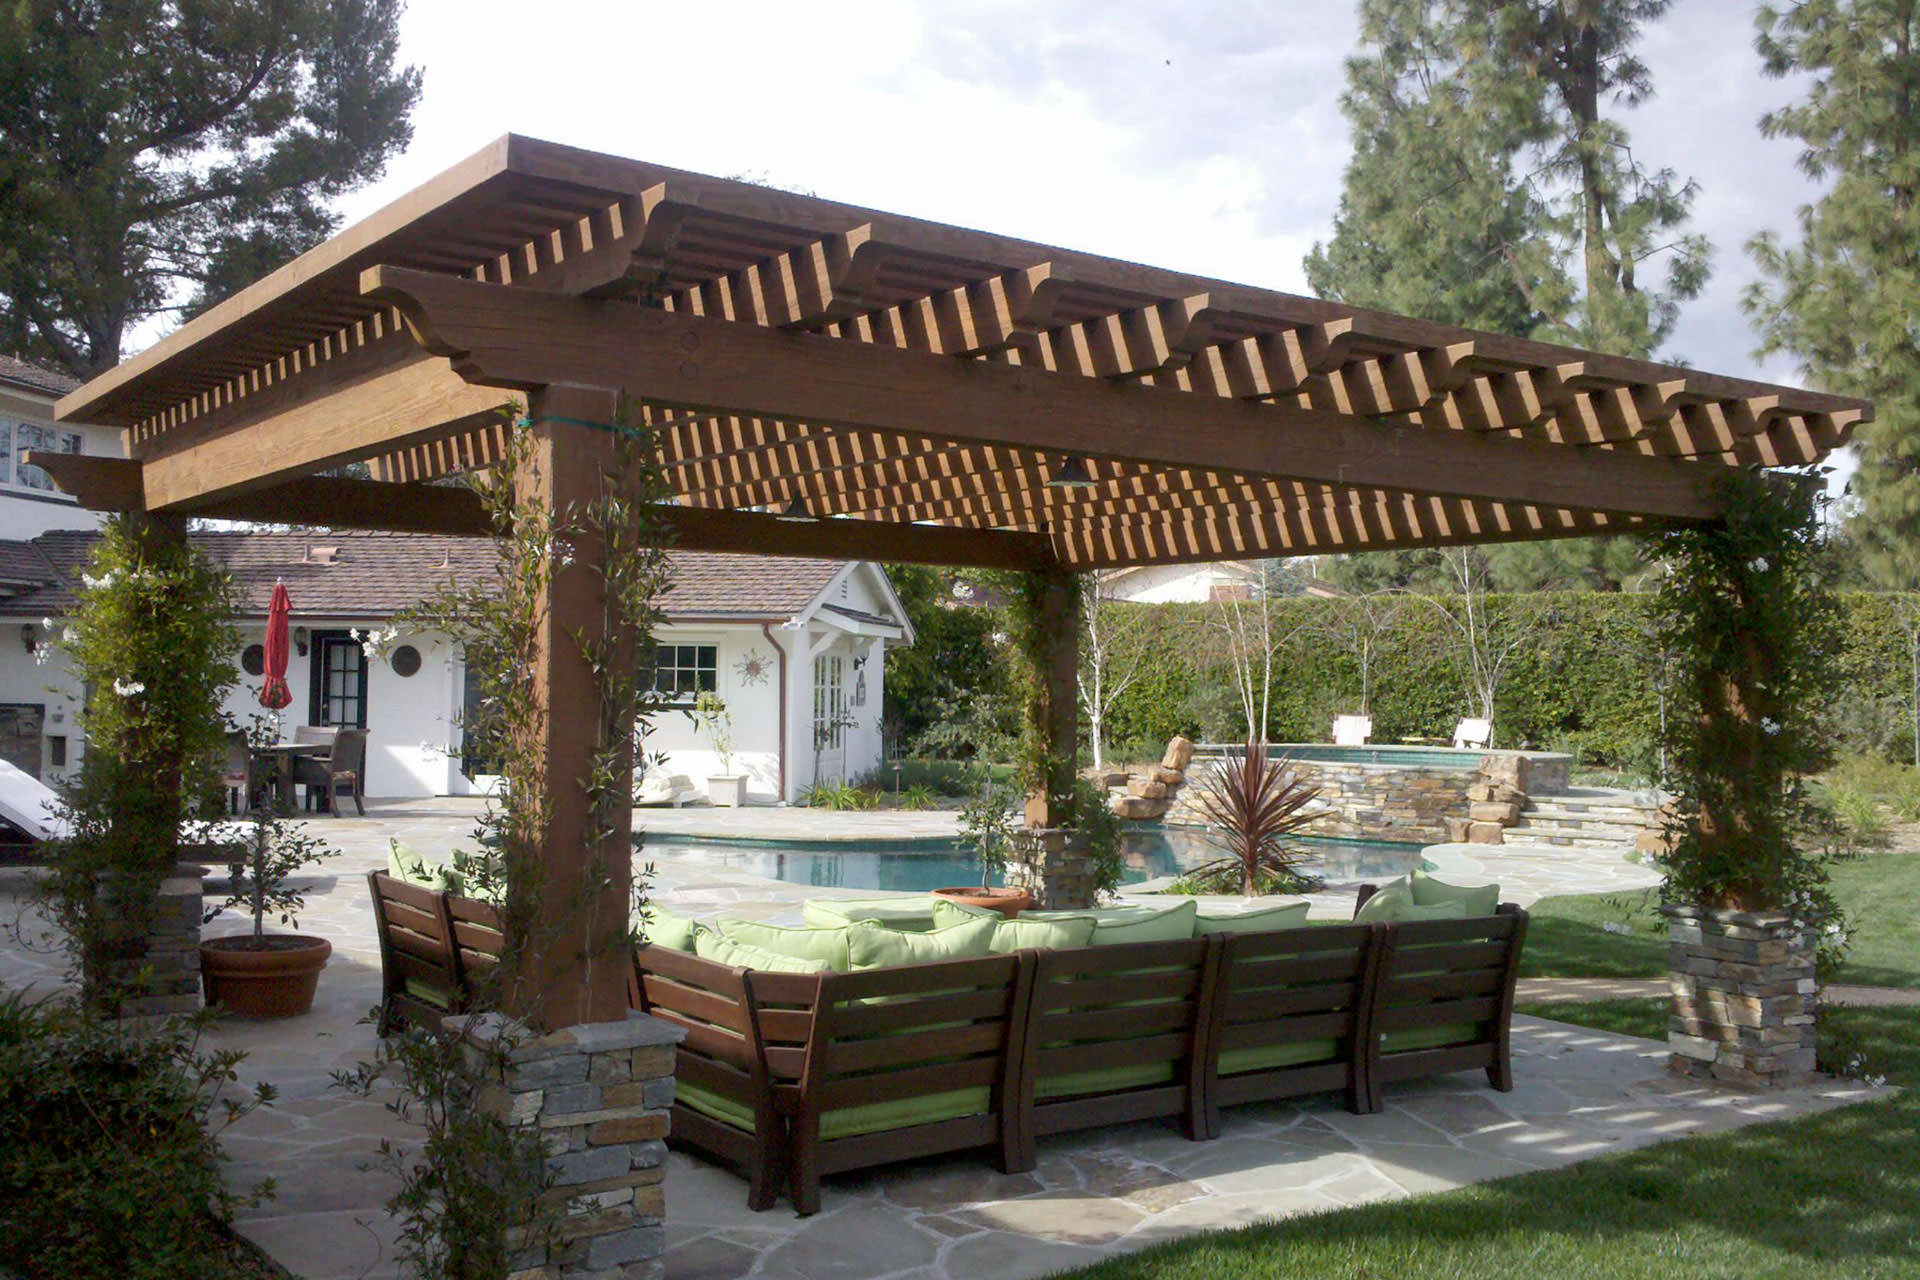 Pergola Roof Ideas: What You Need to Know | ShadeFX Canopies